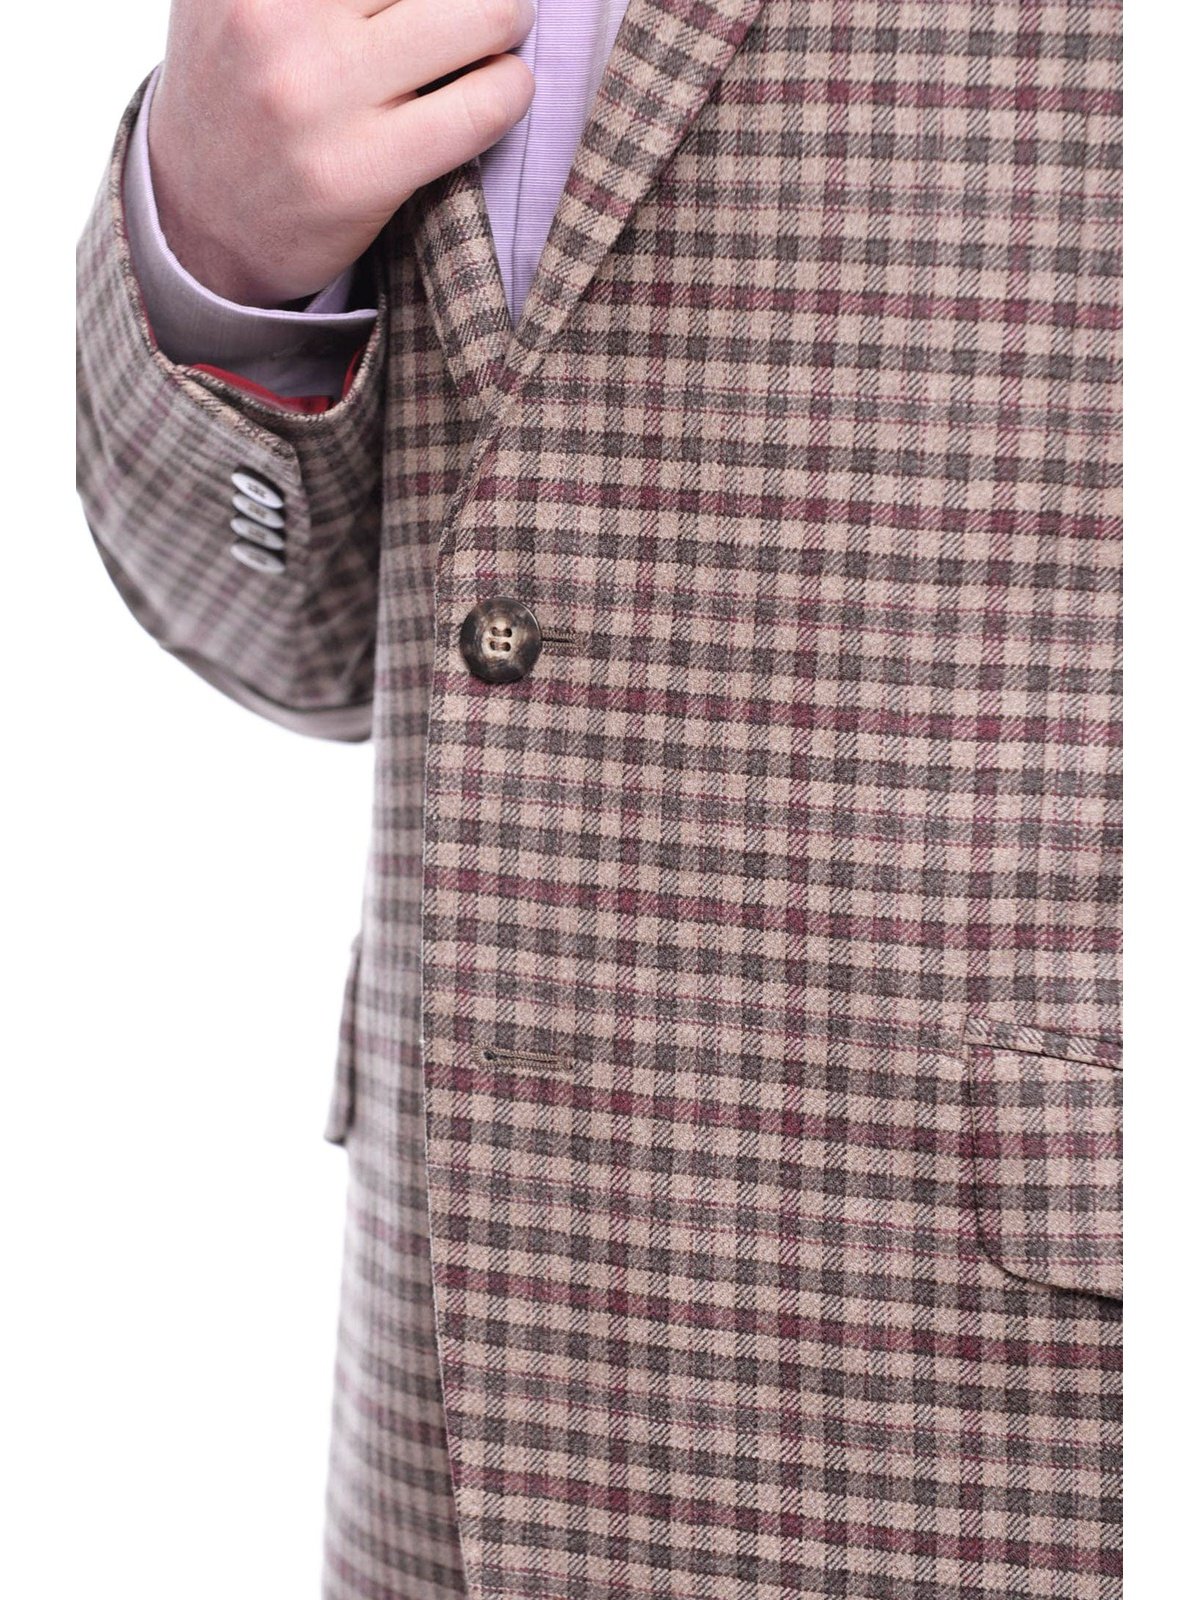 Napoli BLAZERS Napoli Slim Fit Brown &amp; Red Check Half Canvassed Zegna Wool Cashmere Sportcoat